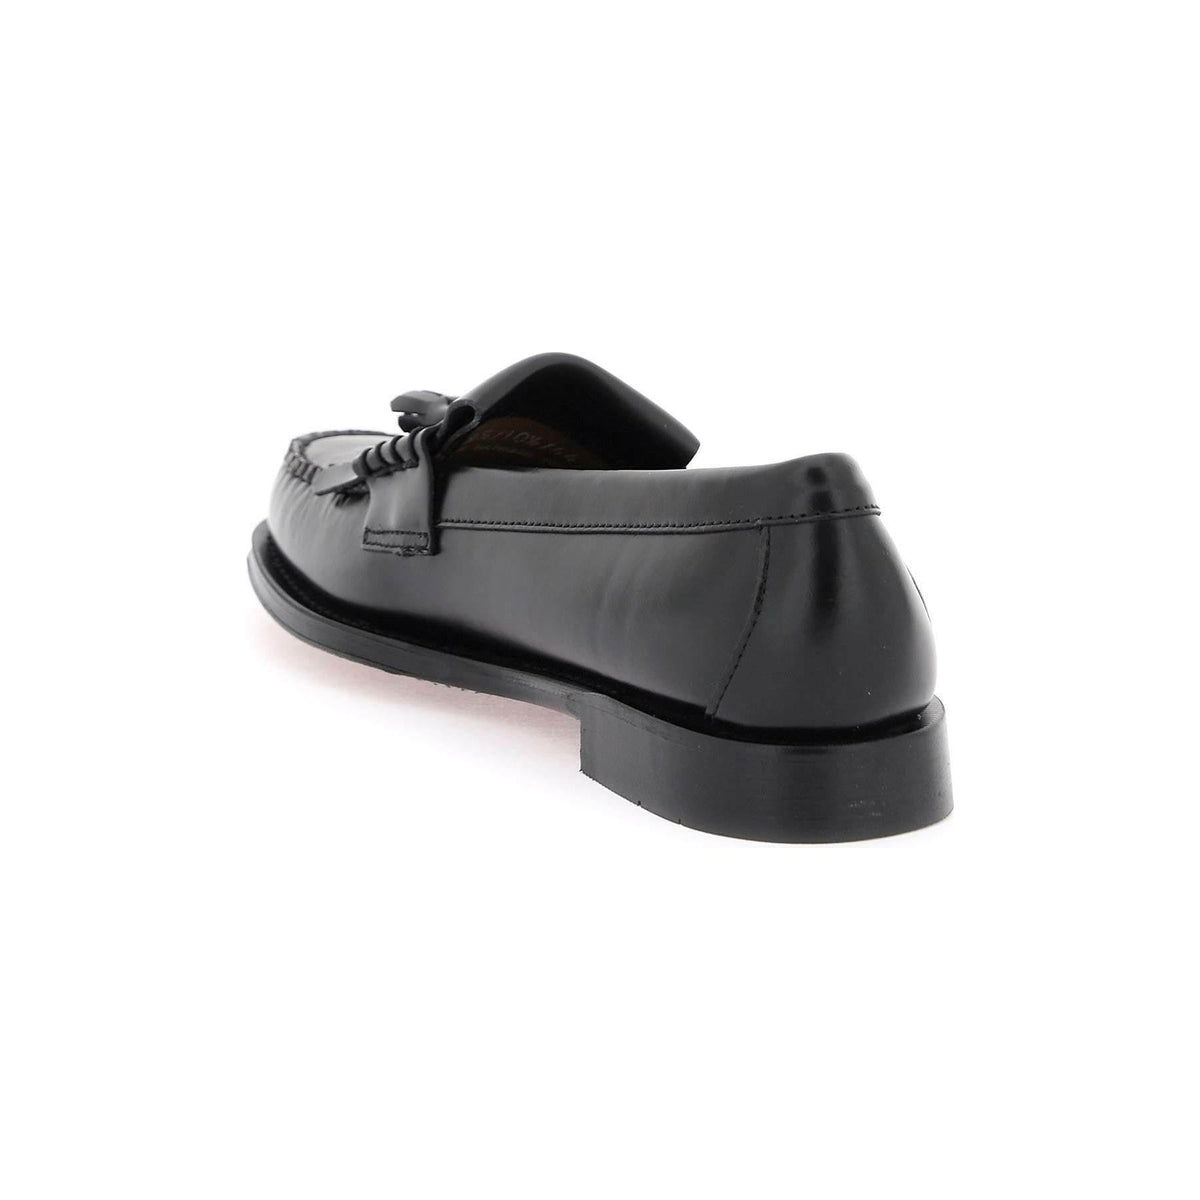 Black Leather Esther Kiltie Weejuns Loafers With Tassels G.H. BASS JOHN JULIA.